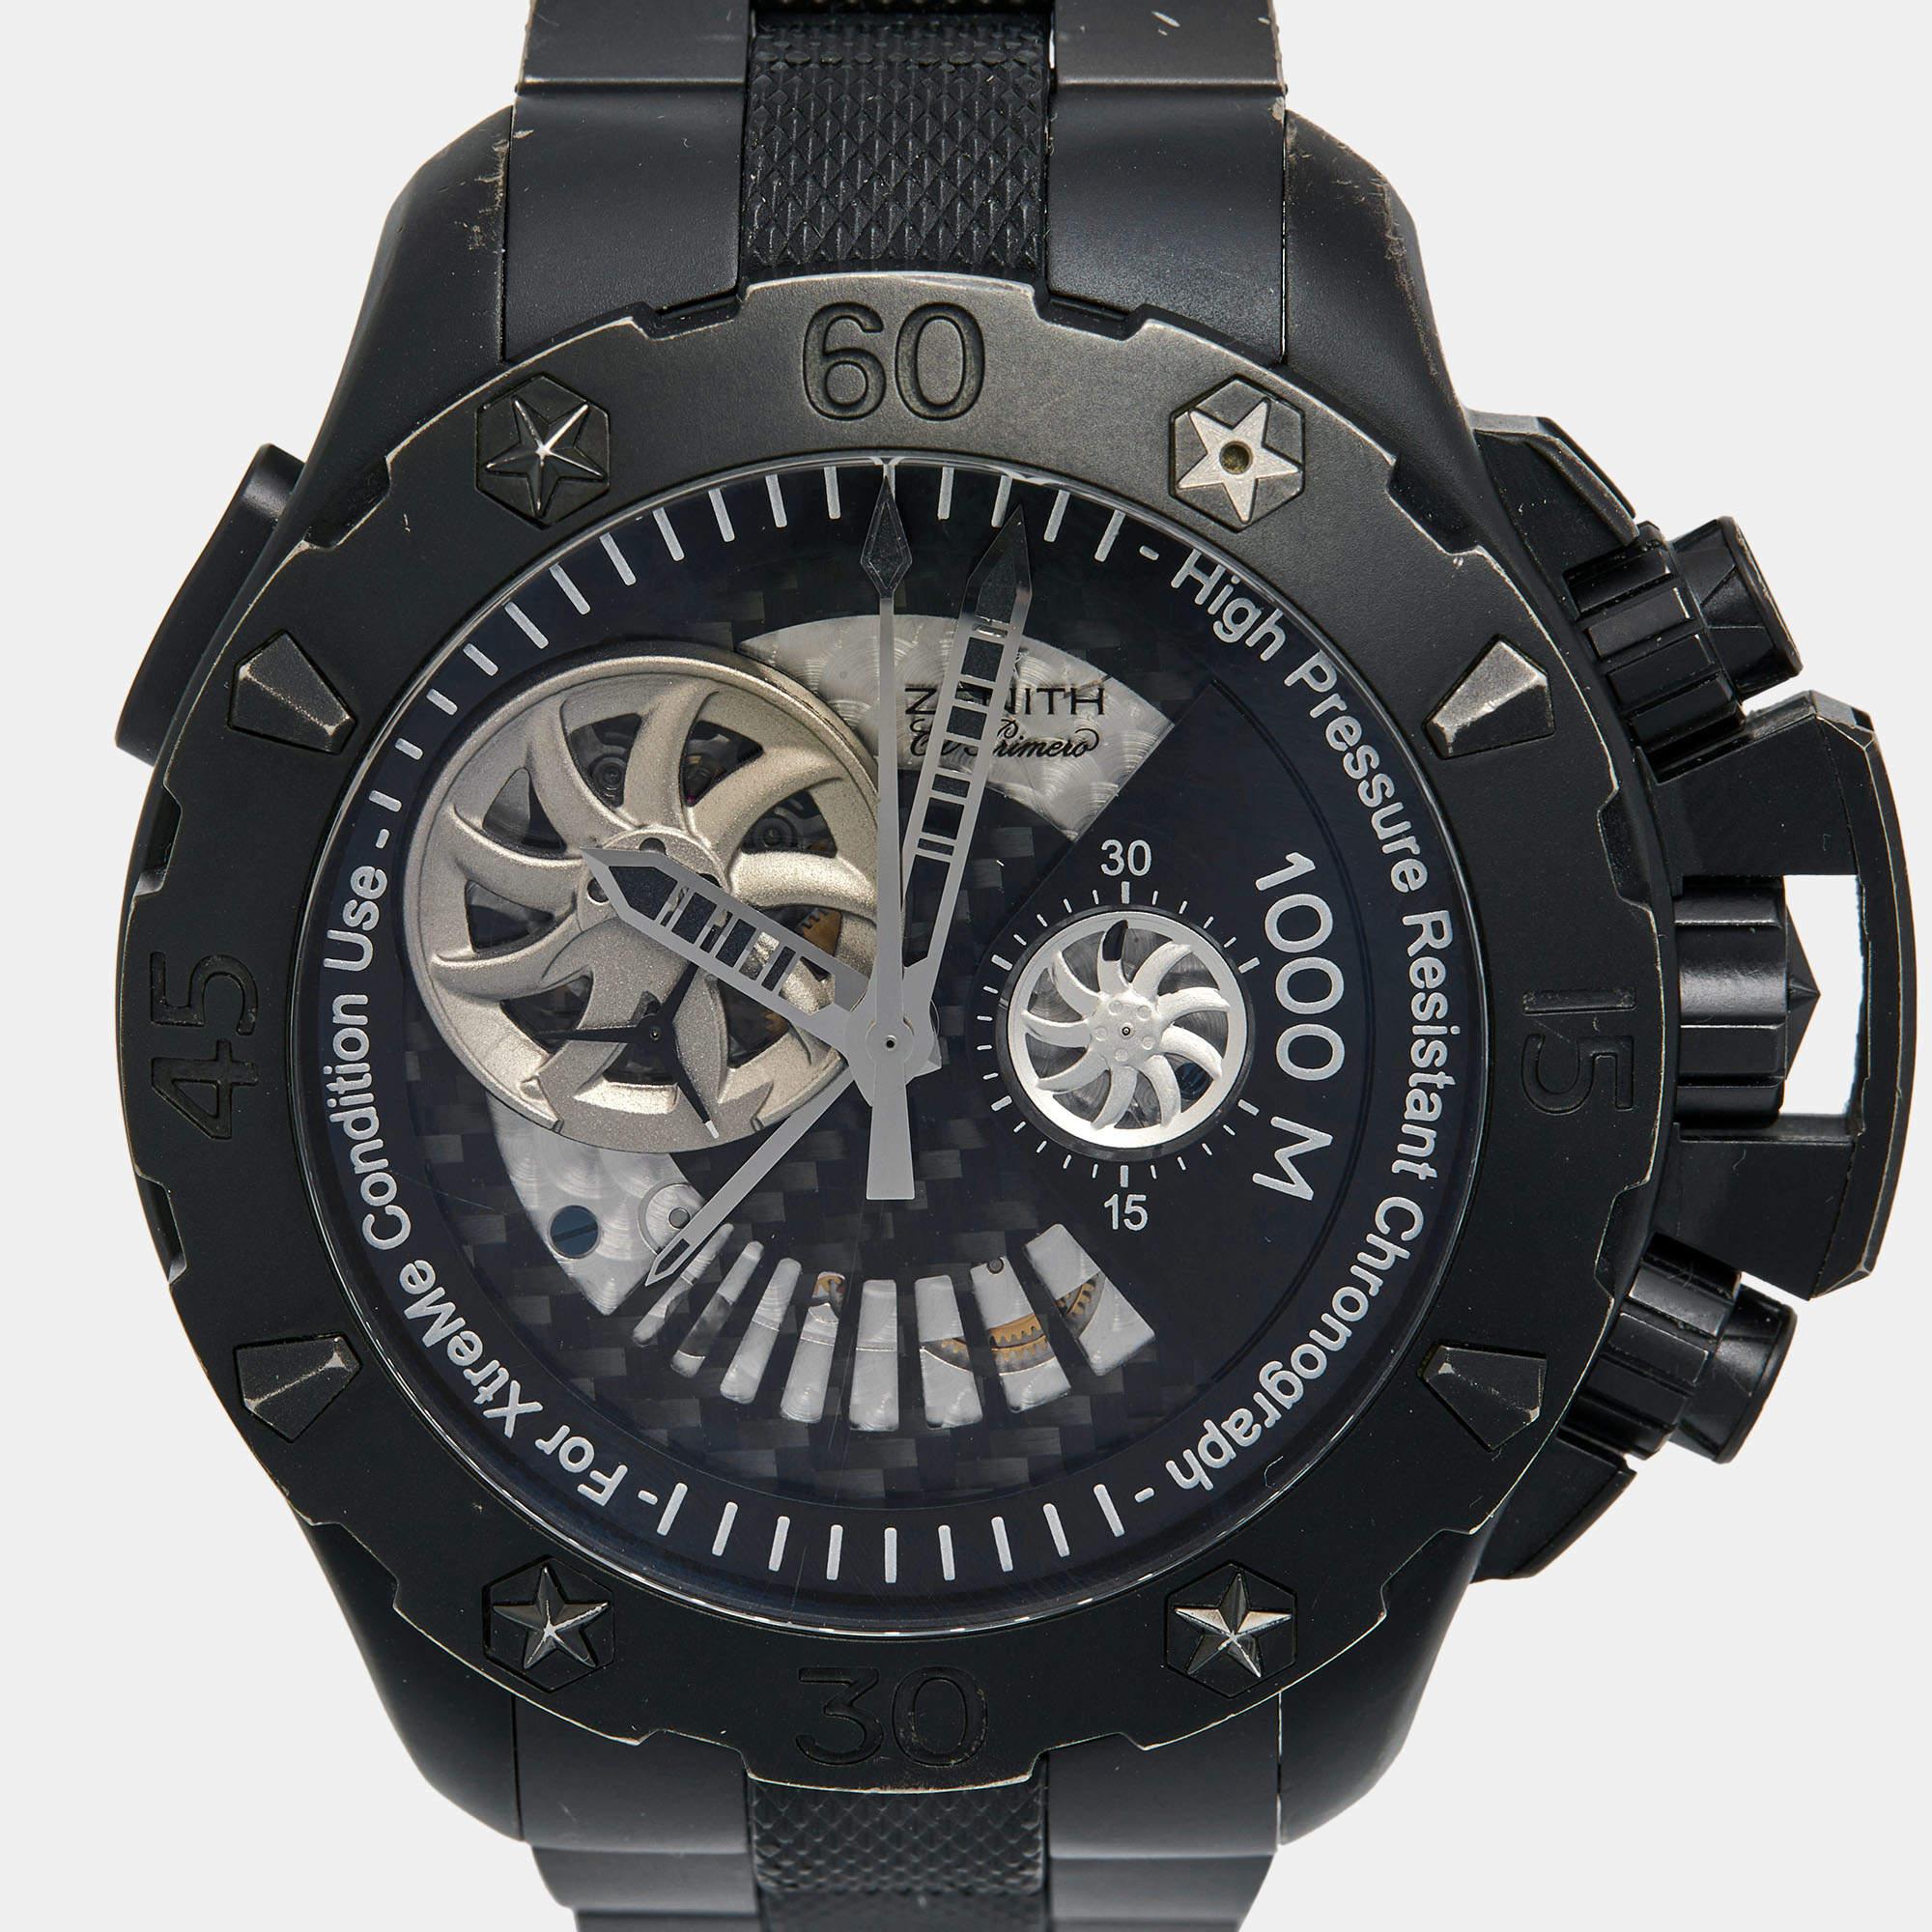 Zenith's Defy Xtreme Stealth Limited Edition 96.0527.4021/22.M529 watch is made of titanium. It has a highly shock-resistant build and 1000m of water resistance. The elements employed in the case and on the dial give it an avante-garde look and